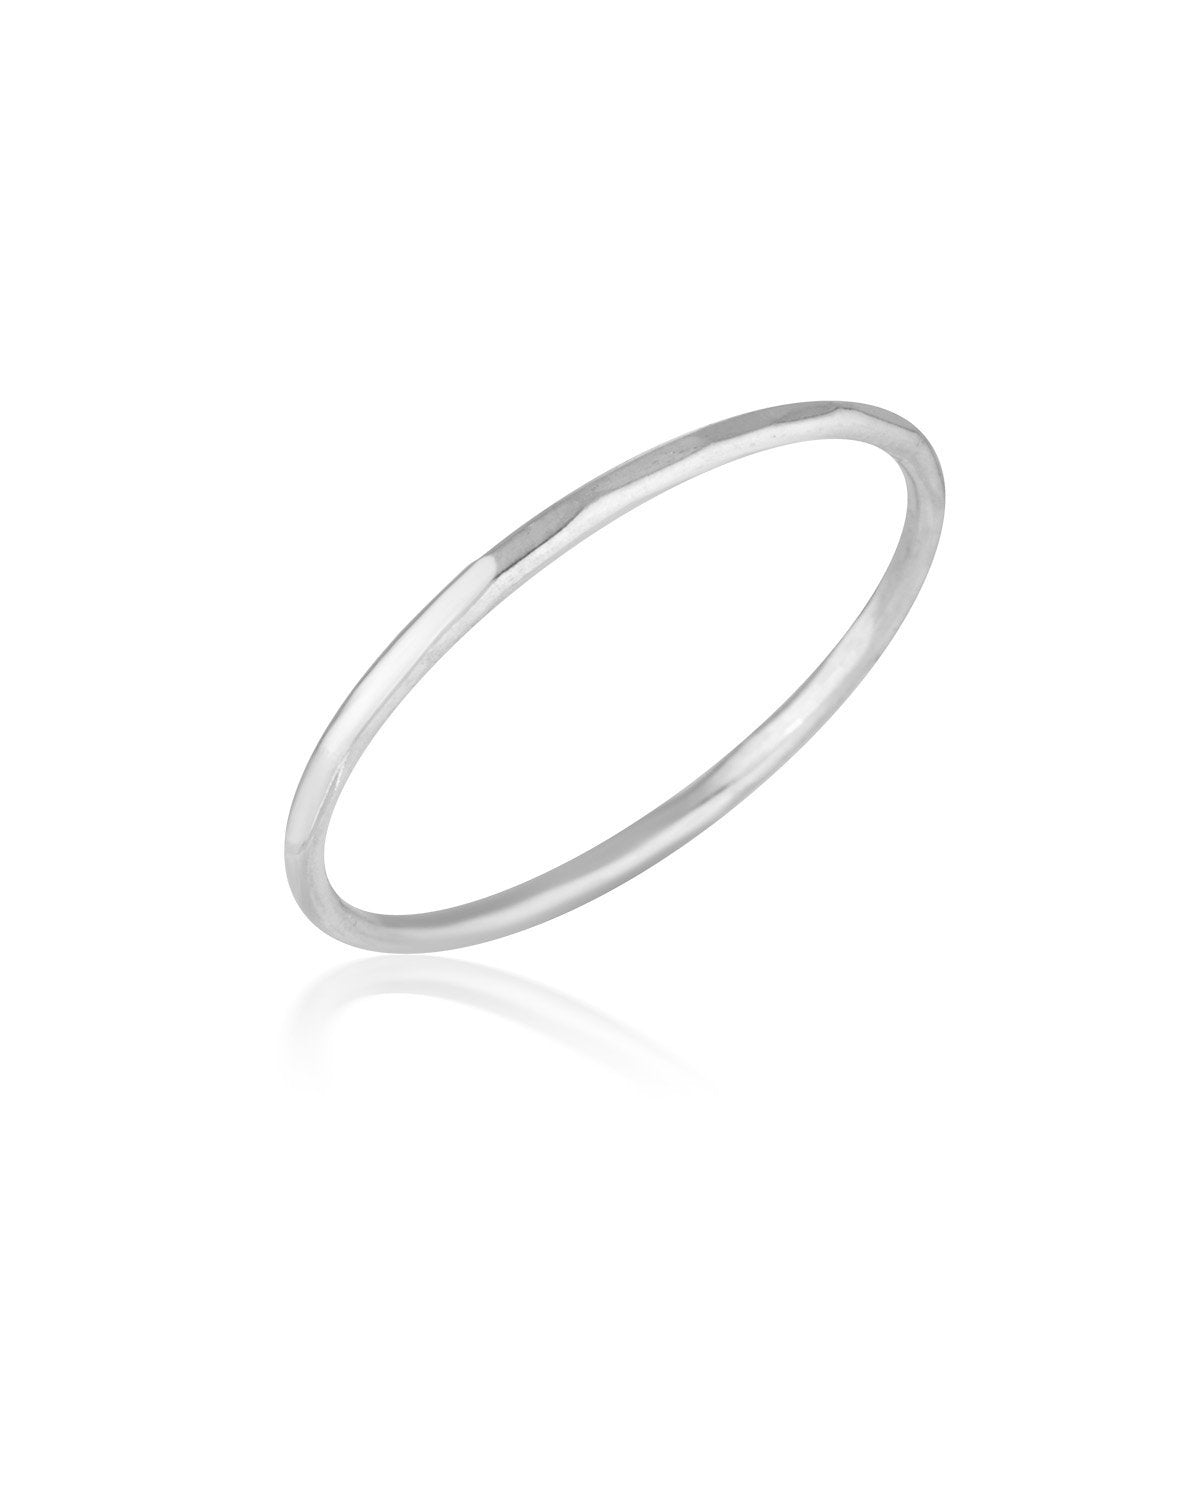 Journey Ring (Sterling Silver) by Sit & Wonder. A lightly hammered plain band.